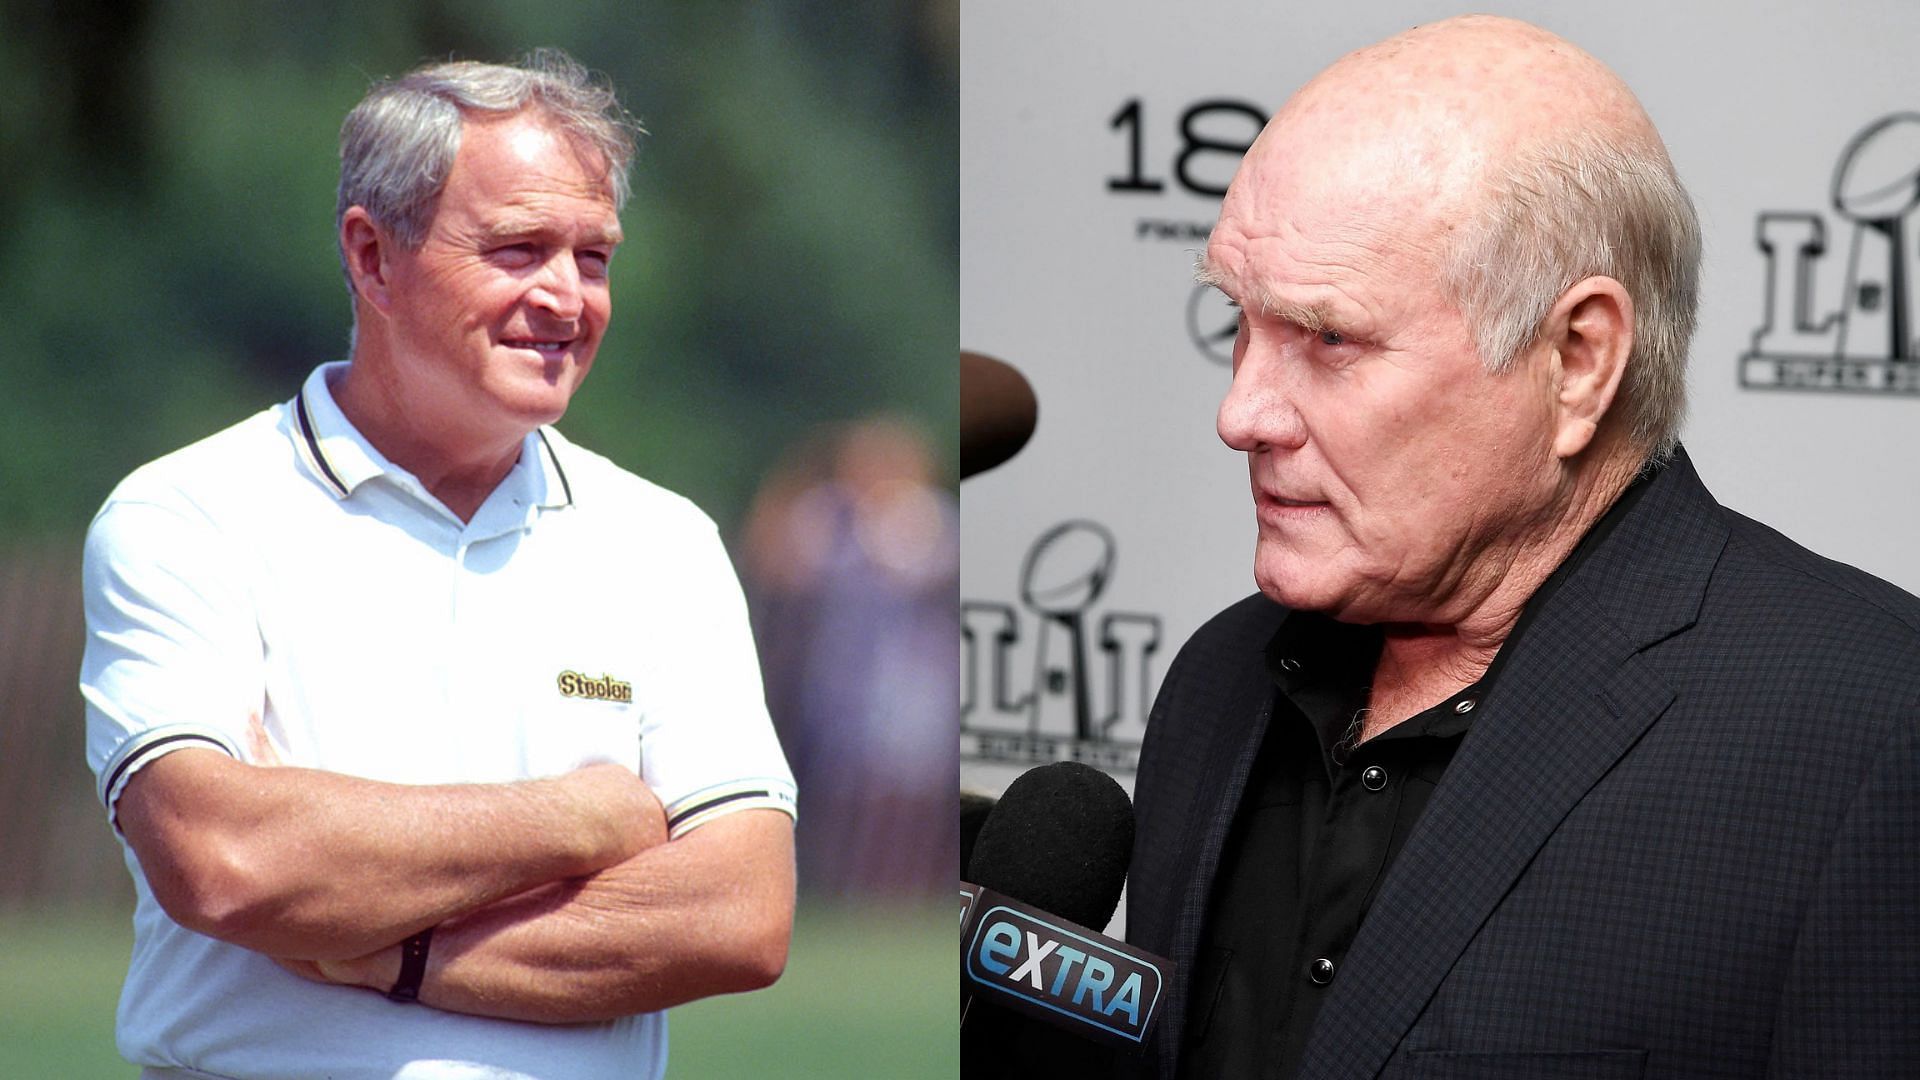 Terry Bradshaw and Chuck Noll were a dominant QB-coach duo in the 1970s